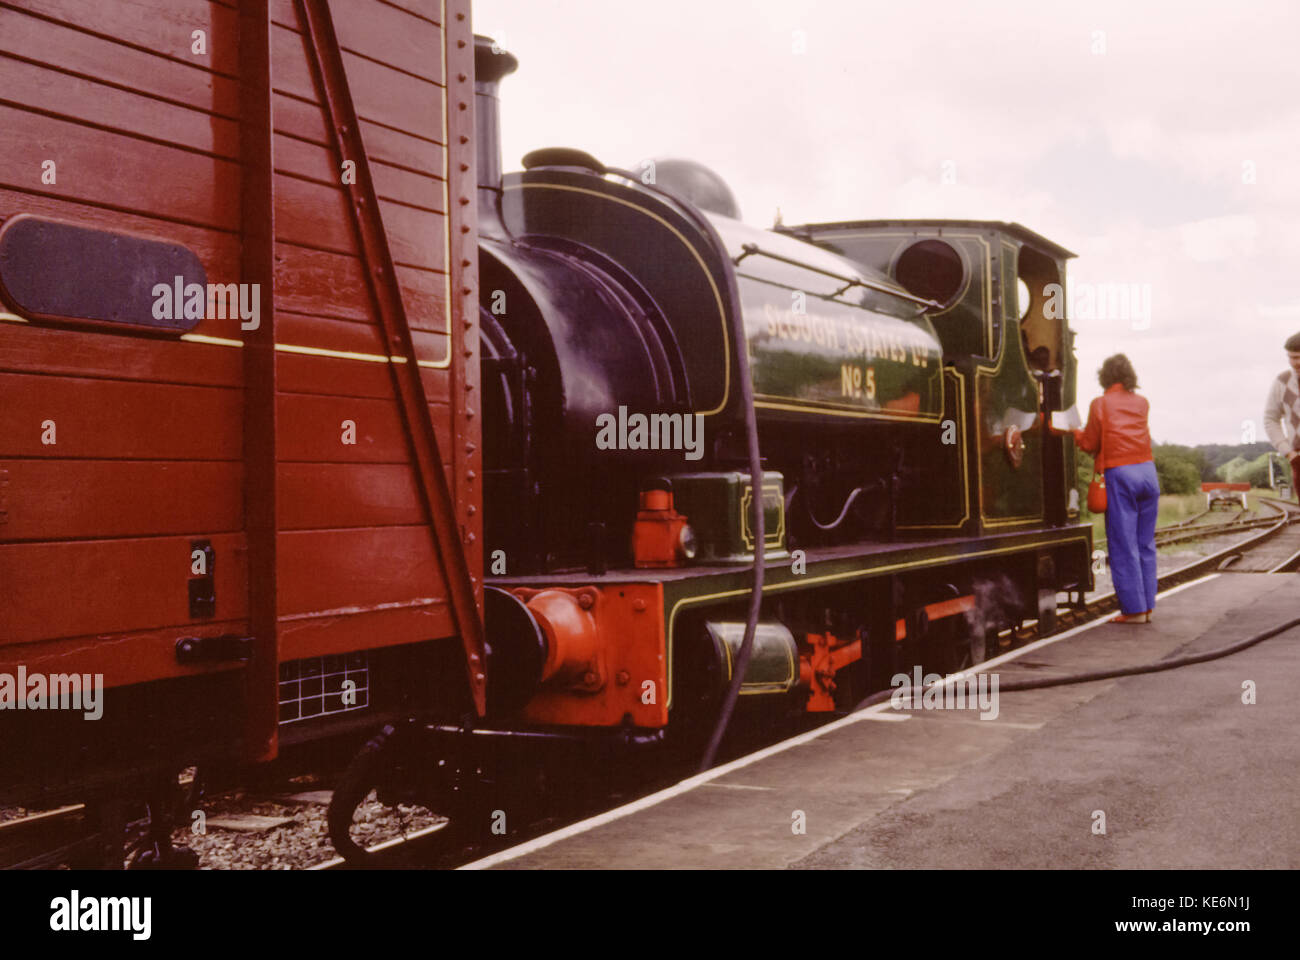 Steam locomotive train at station platform with woman talking to the train driver. Steam train is called Slough Estates no 5, Embsay and Bolton Abbey Steam Railway, Yorkshire, England, UK in the 1980s Stock Photo